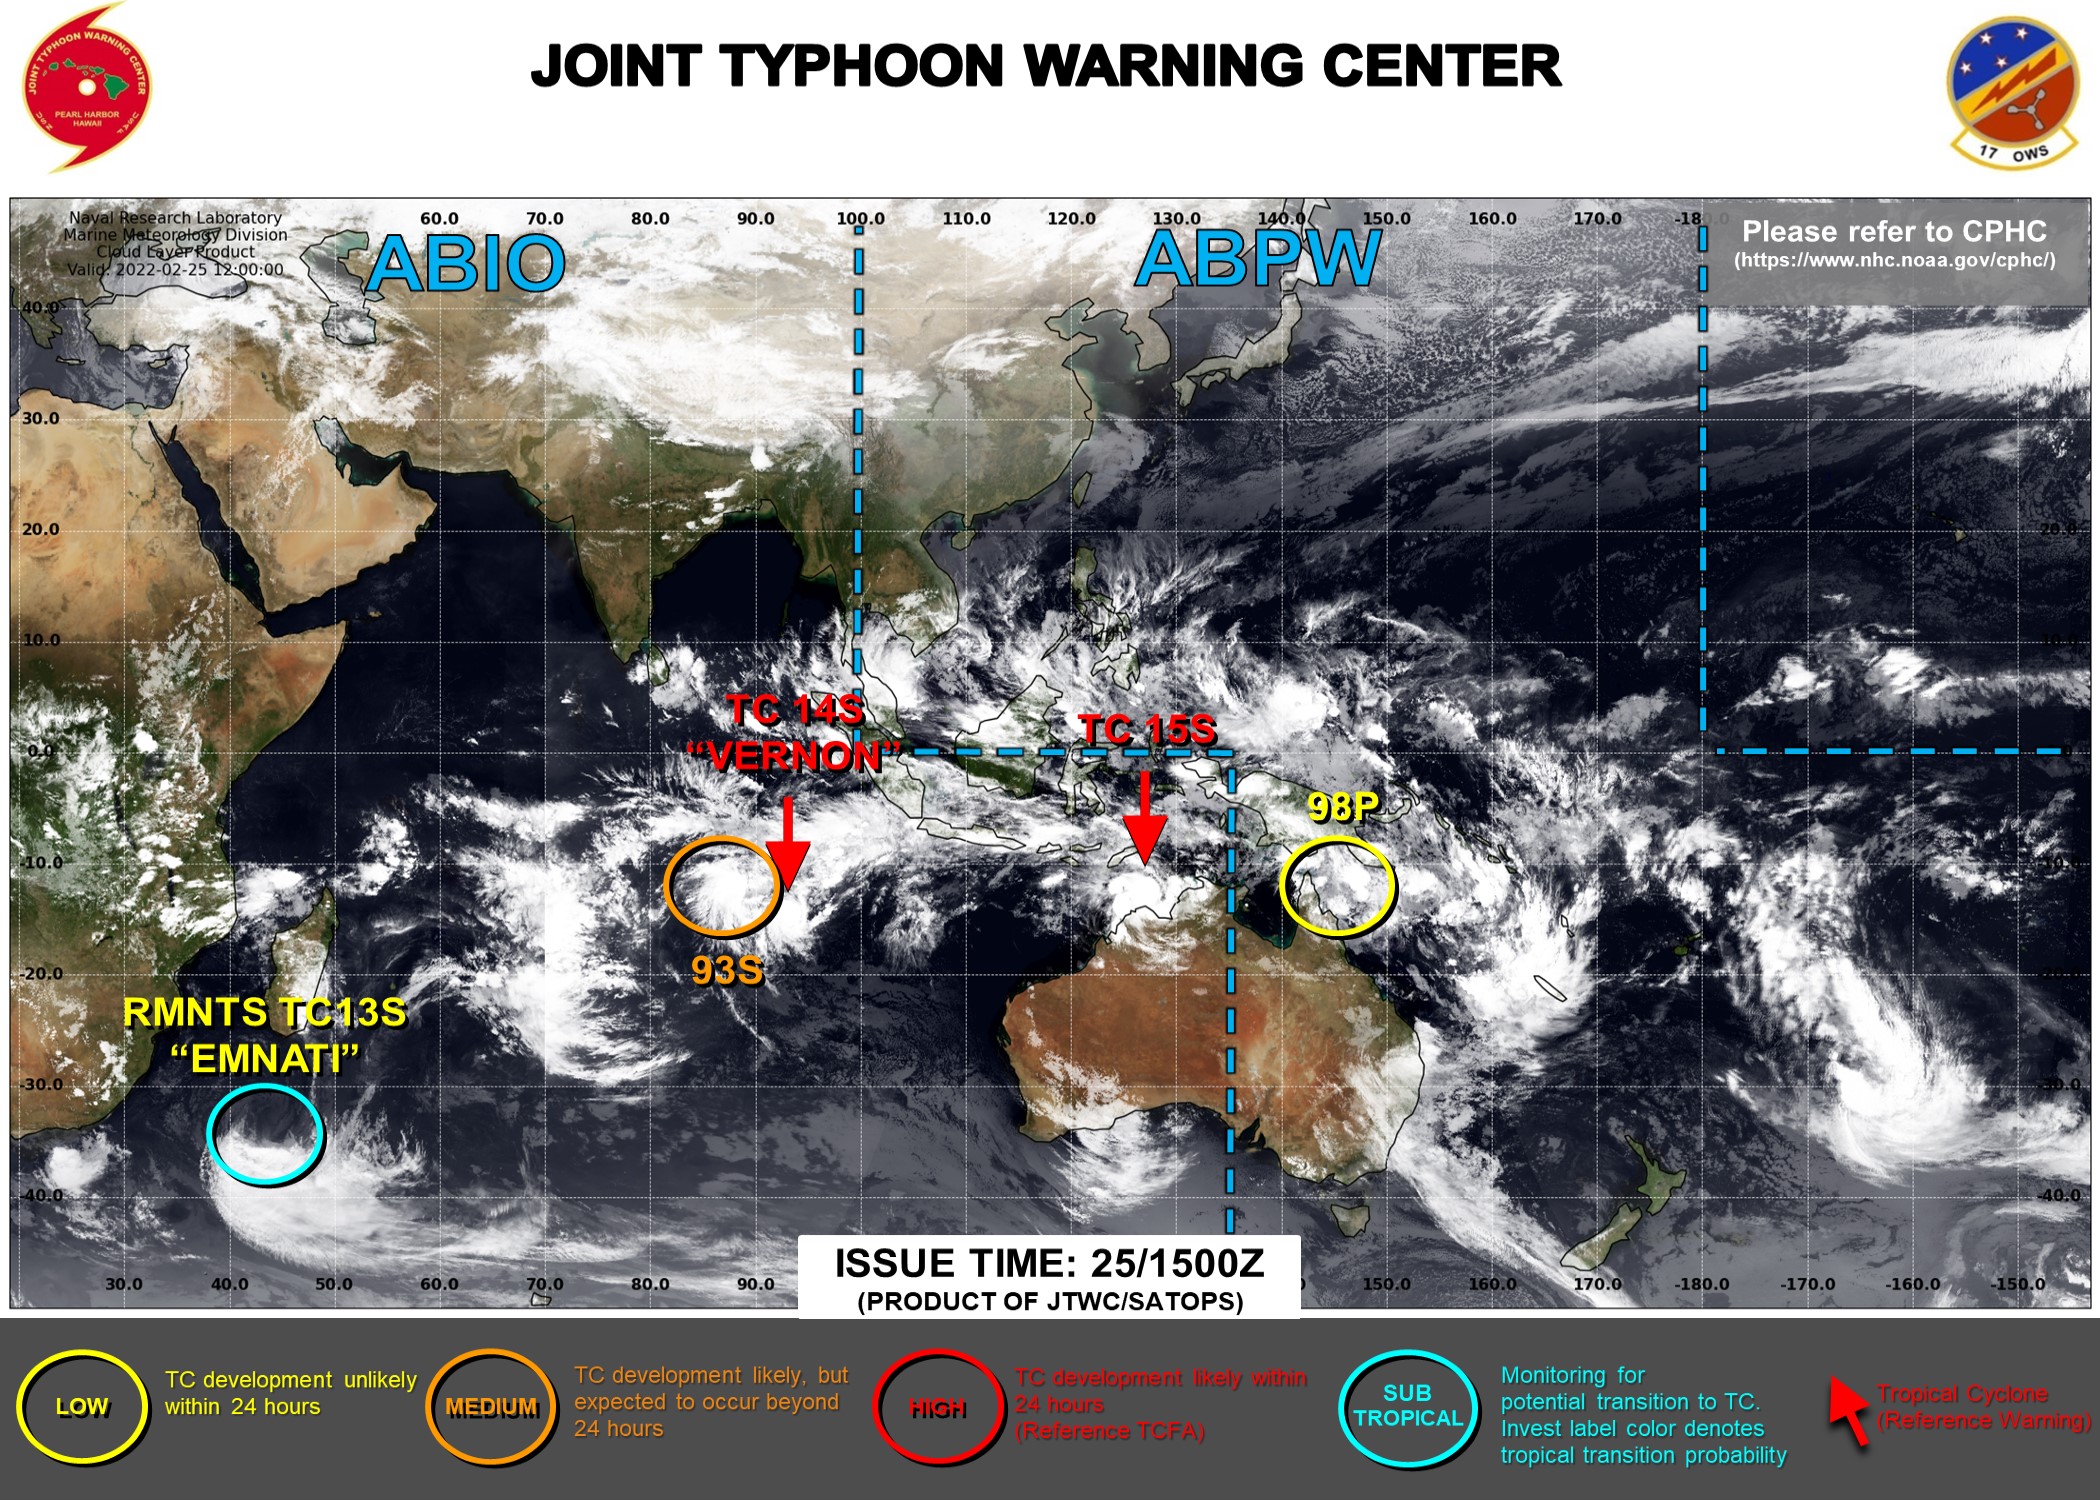 JTWC IS ISSUING 12HOURLY WARNINGS ON TC 14S(VERNON) AND 6HOURLY WARNINGS ON TC 15S. 3HOURLY SATELLITE BULLETINS ARE ISSUED ON 14S,15S, INVEST 93S AND INVEST 98P.